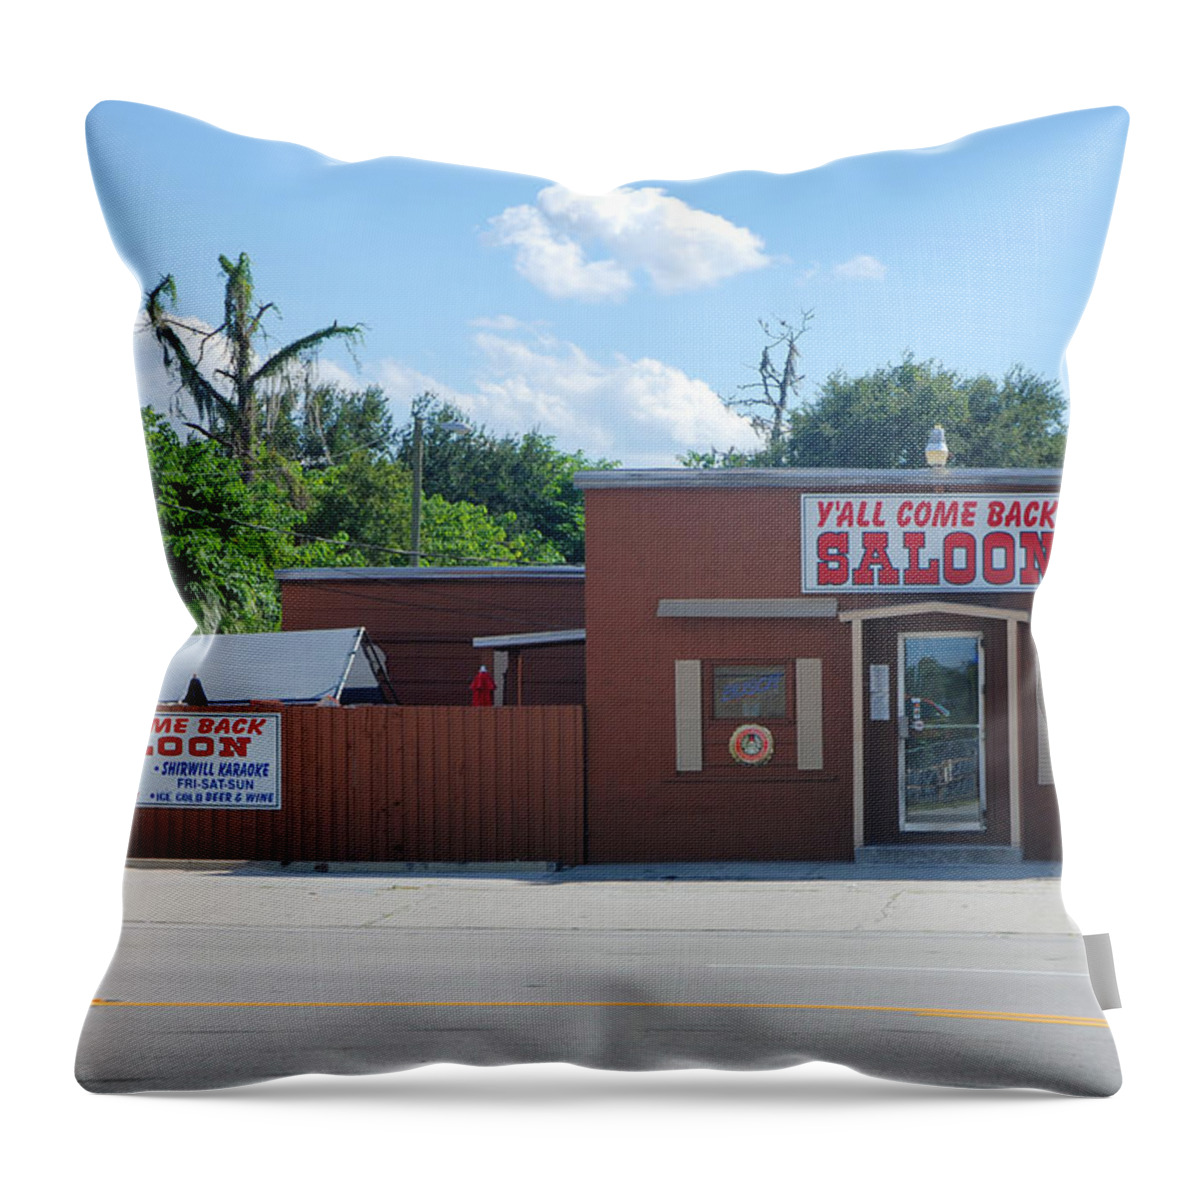  Y'all Come Back Saloon Throw Pillow featuring the photograph 13- Y'all Come Back Saloon by Joseph Keane